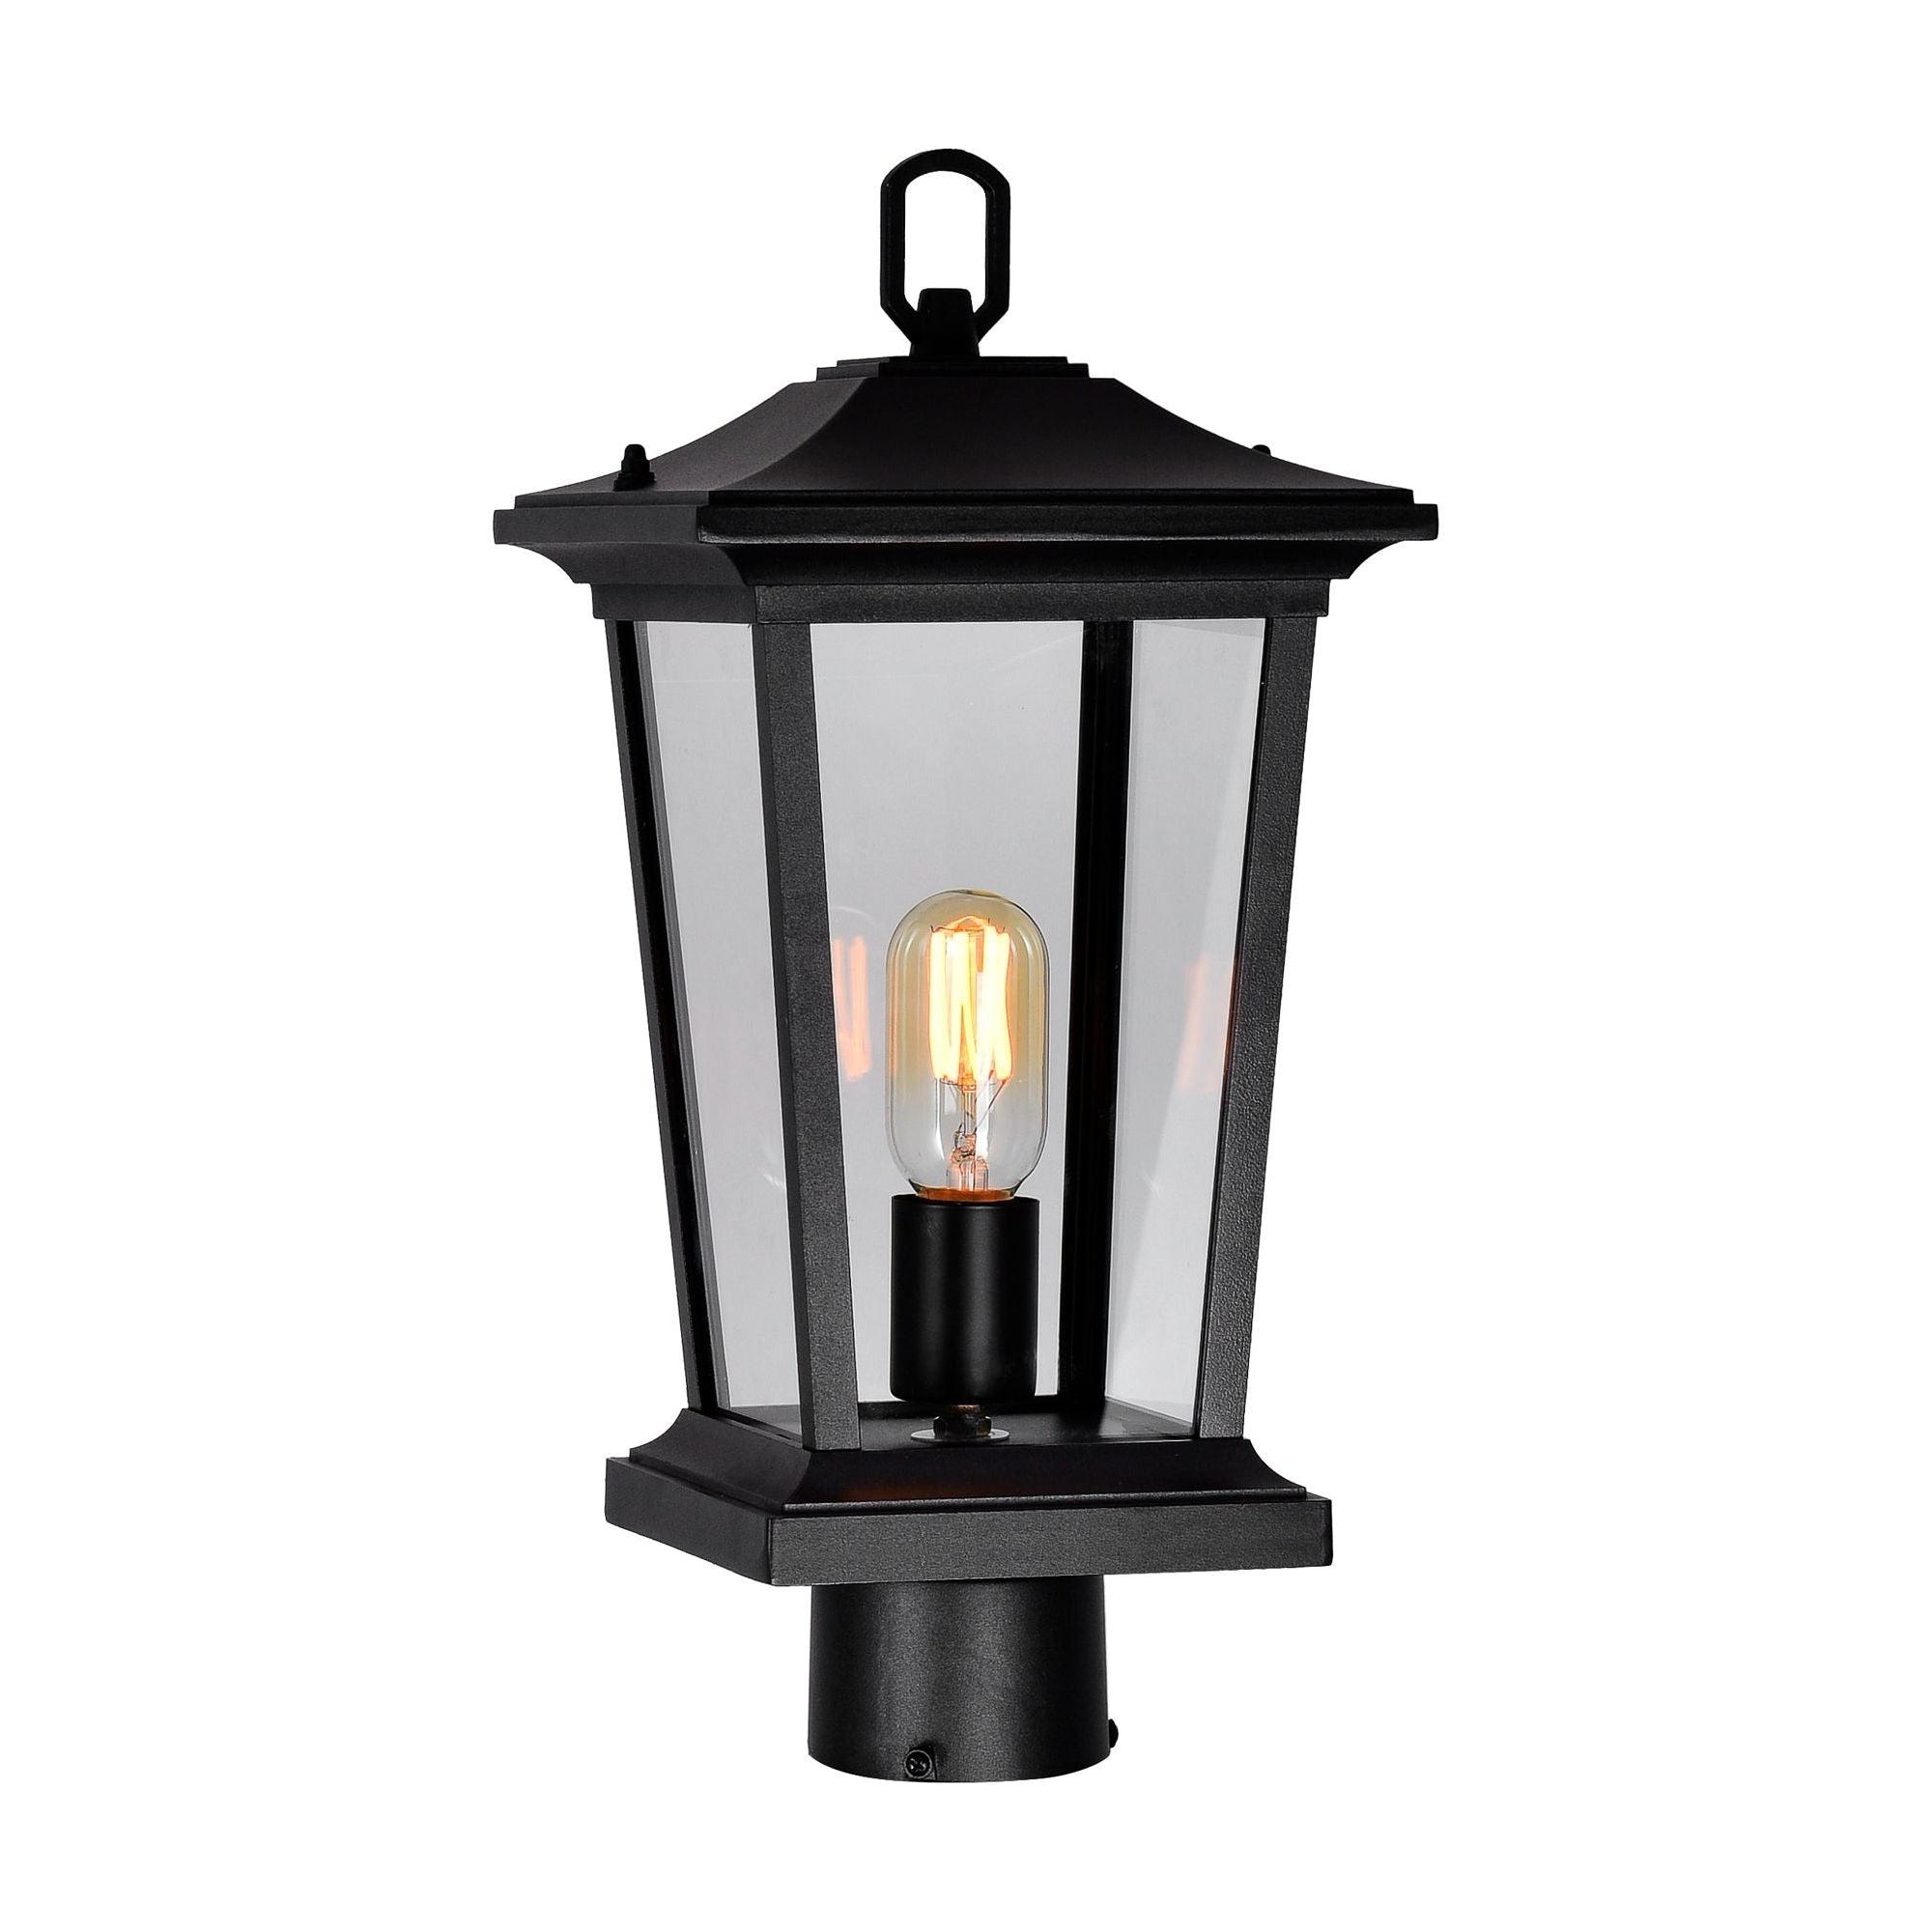 CWI - Leawood 1-Light Outdoor Post Light - Lights Canada